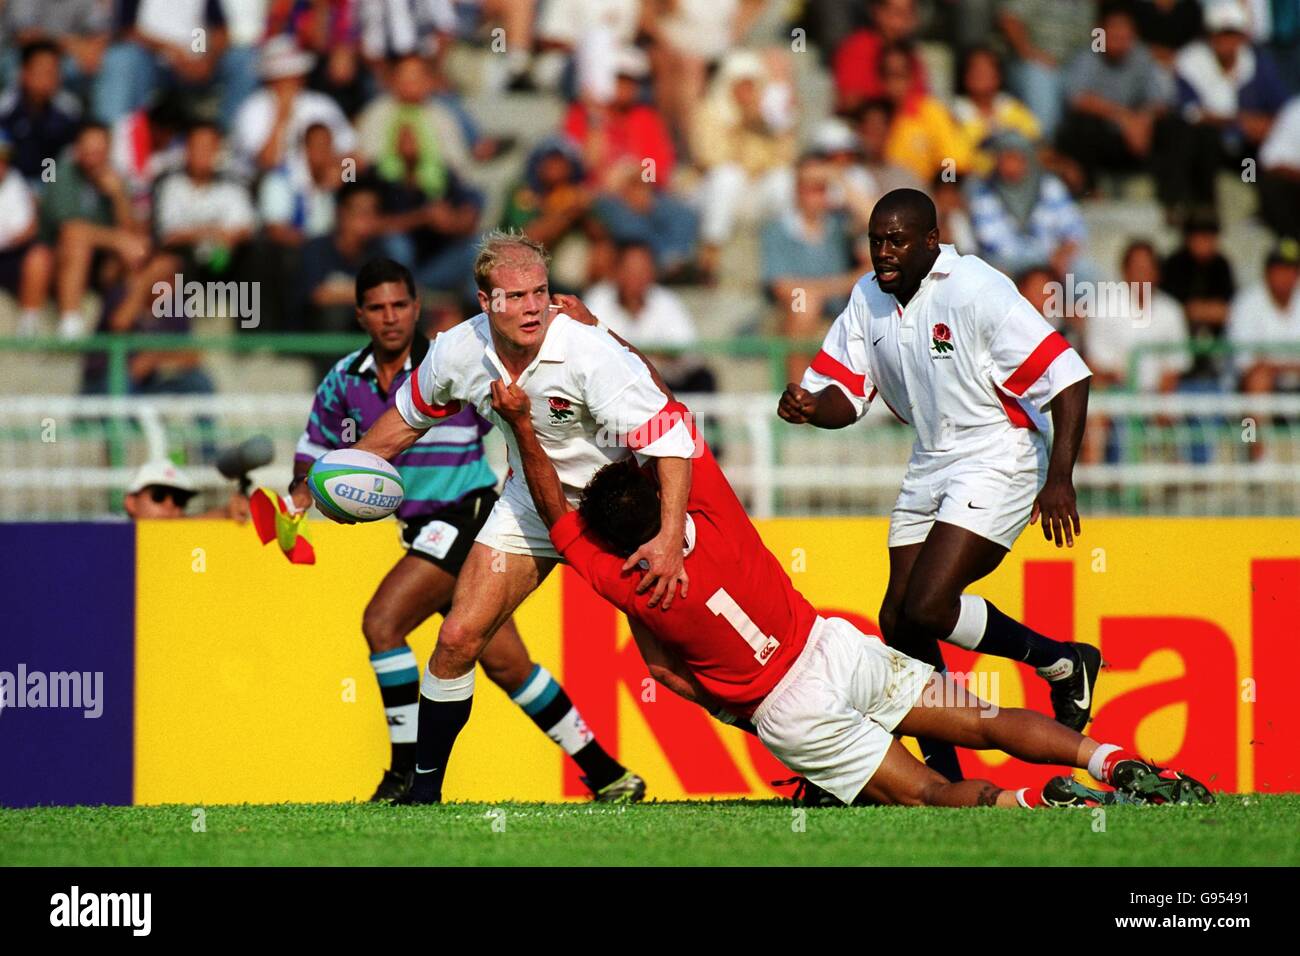 England's Russel Earnshaw (left) passes the ball as he is tackled by Tonga's Tevita Fisilau (centre), watched by England's Nick Baxter (right) Stock Photo